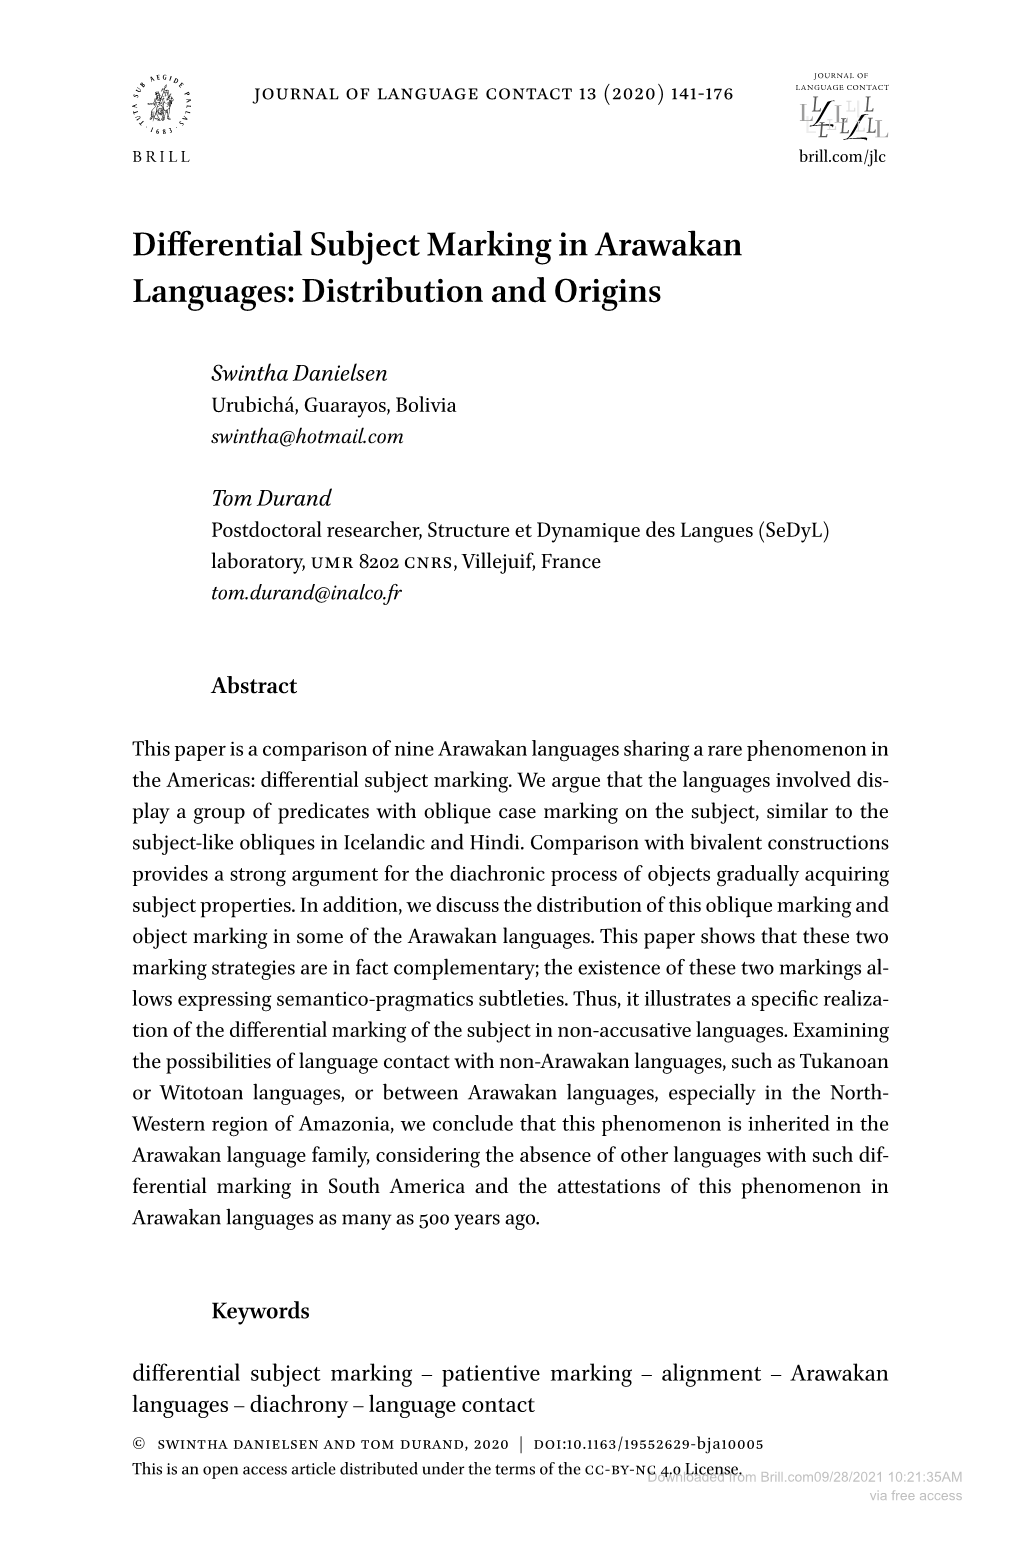 Differential Subject Marking in Arawakan Languages: Distribution and Origins